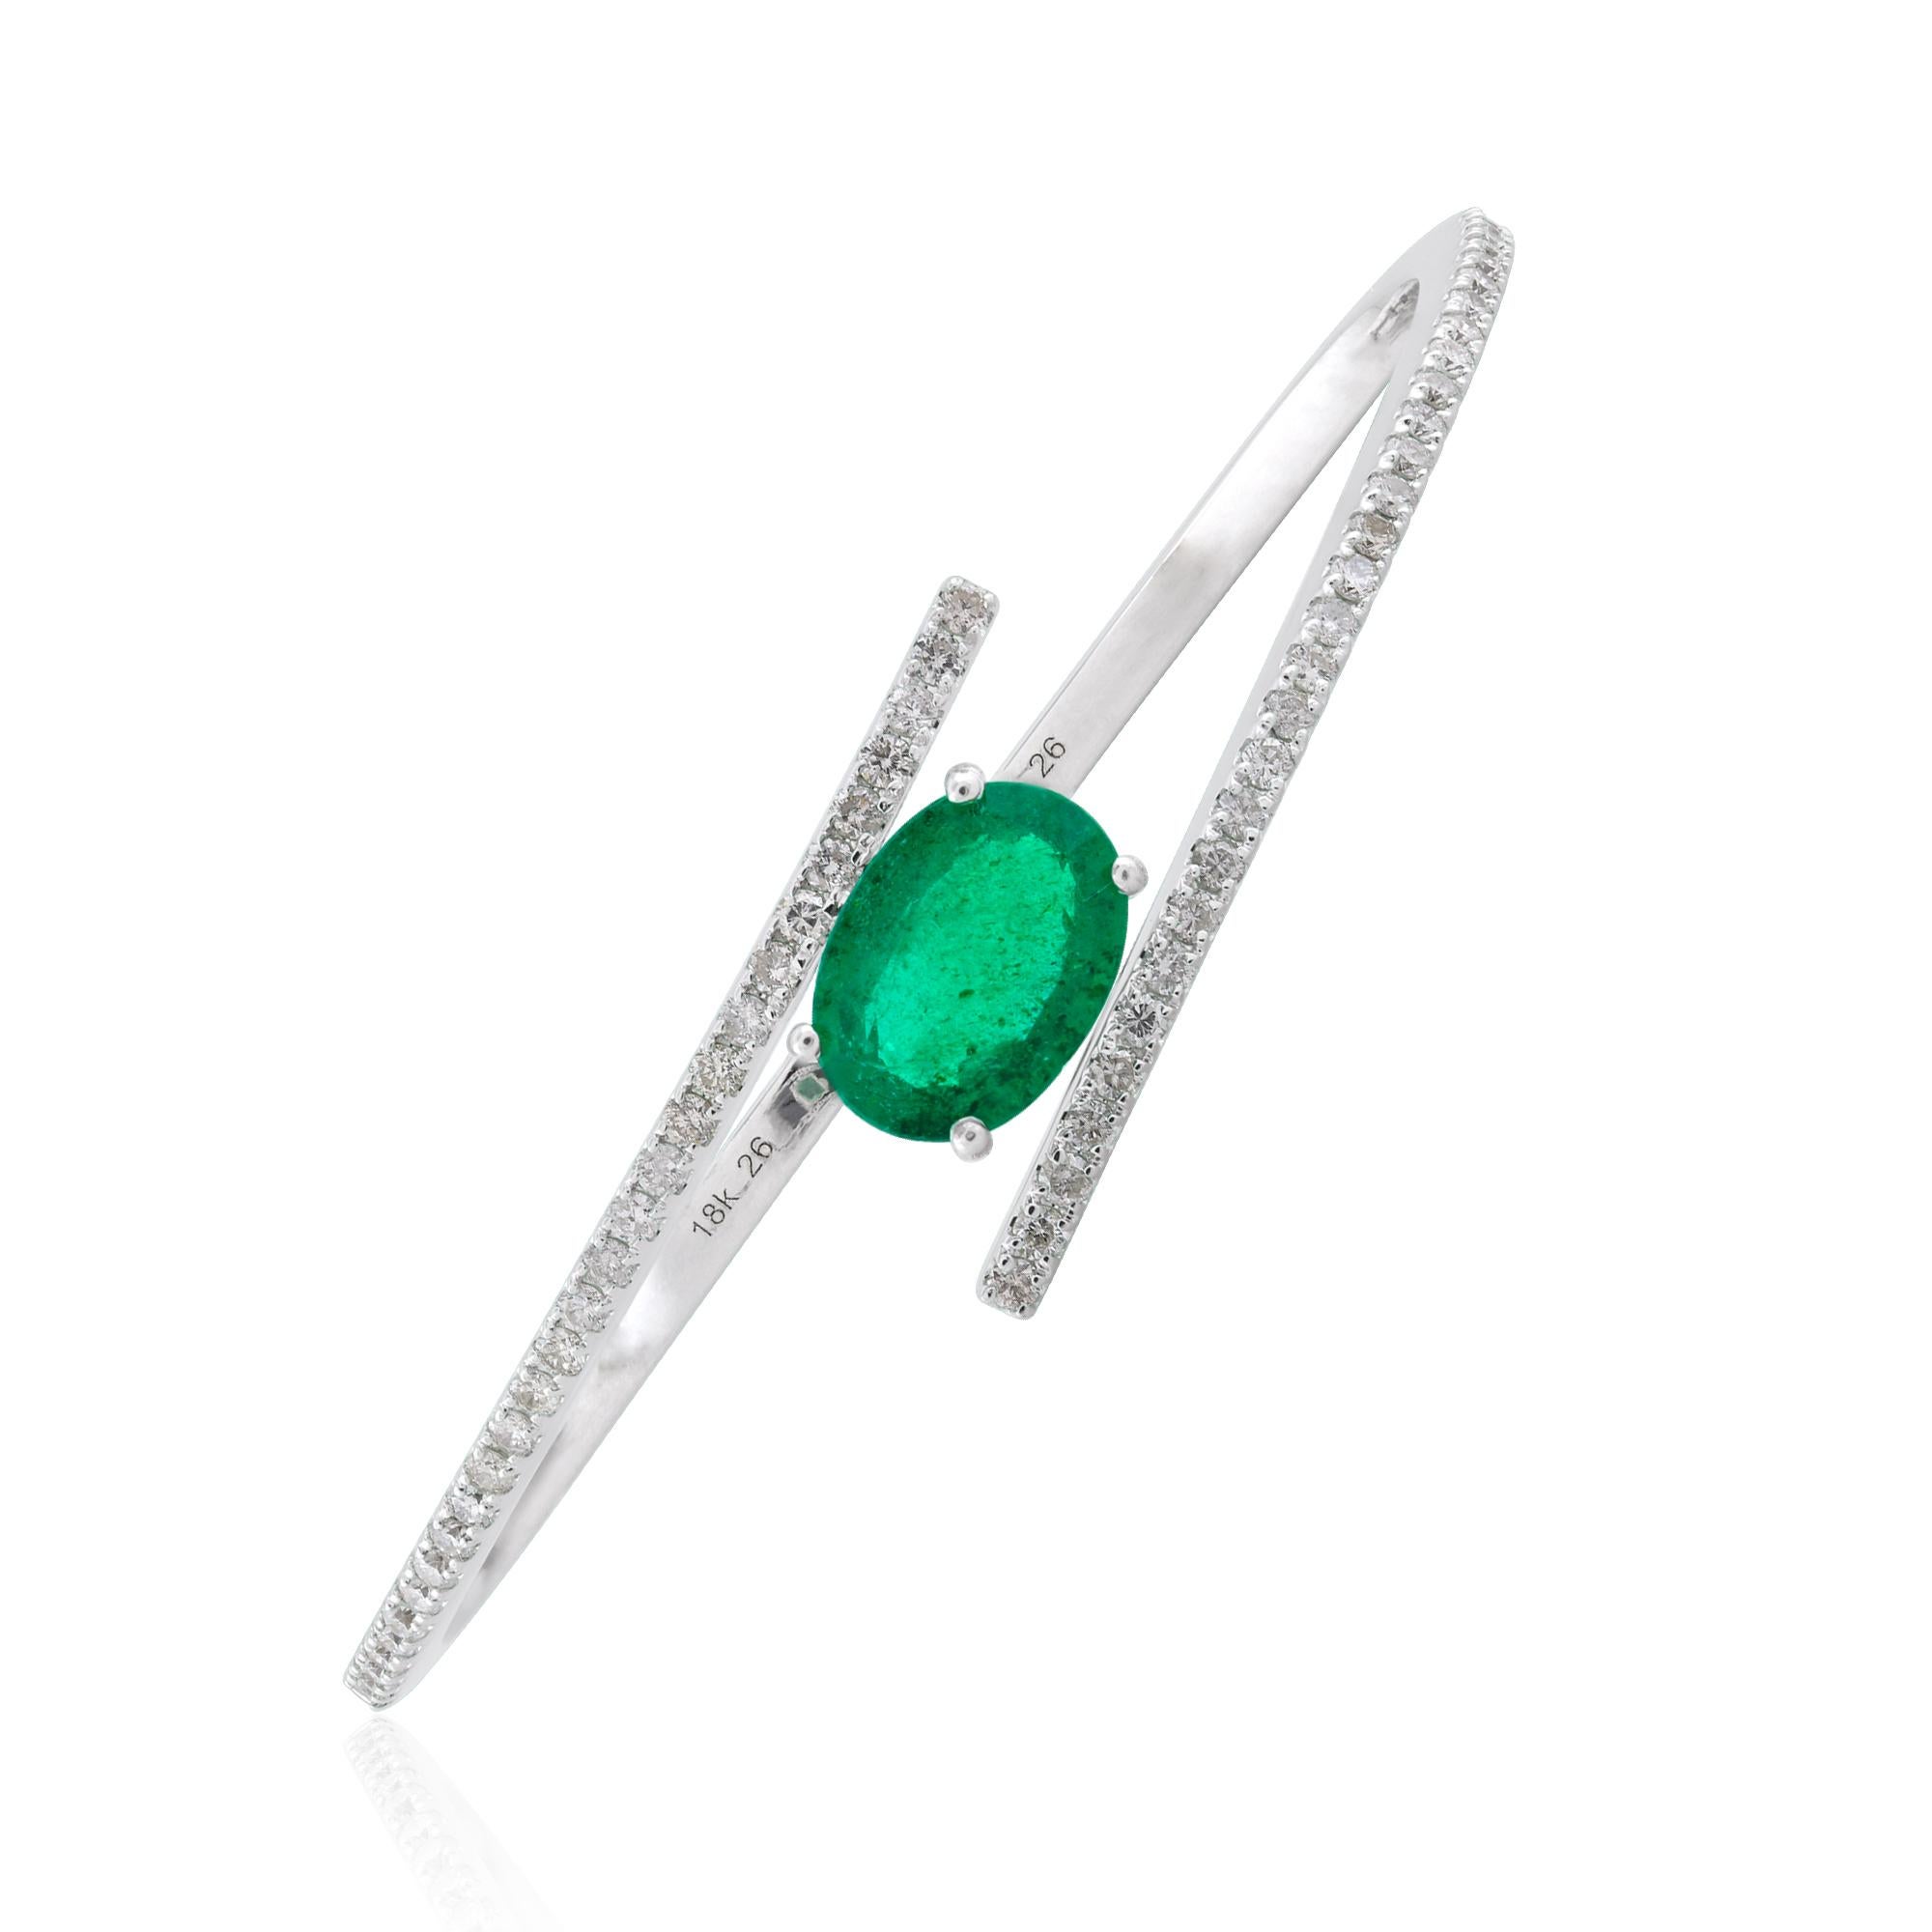 Item Code :- SEB-6308B
Gross Weight :- 11.94 gm
18k Solid White Gold Weight :- 11.09 gm
Natural Diamond Weight :- 0.65 carat  ( AVERAGE DIAMOND CLARITY SI1-SI2 & COLOR H-I )
Emerald Weight :- 3.61 carat

✦ Sizing
.....................
We can adjust